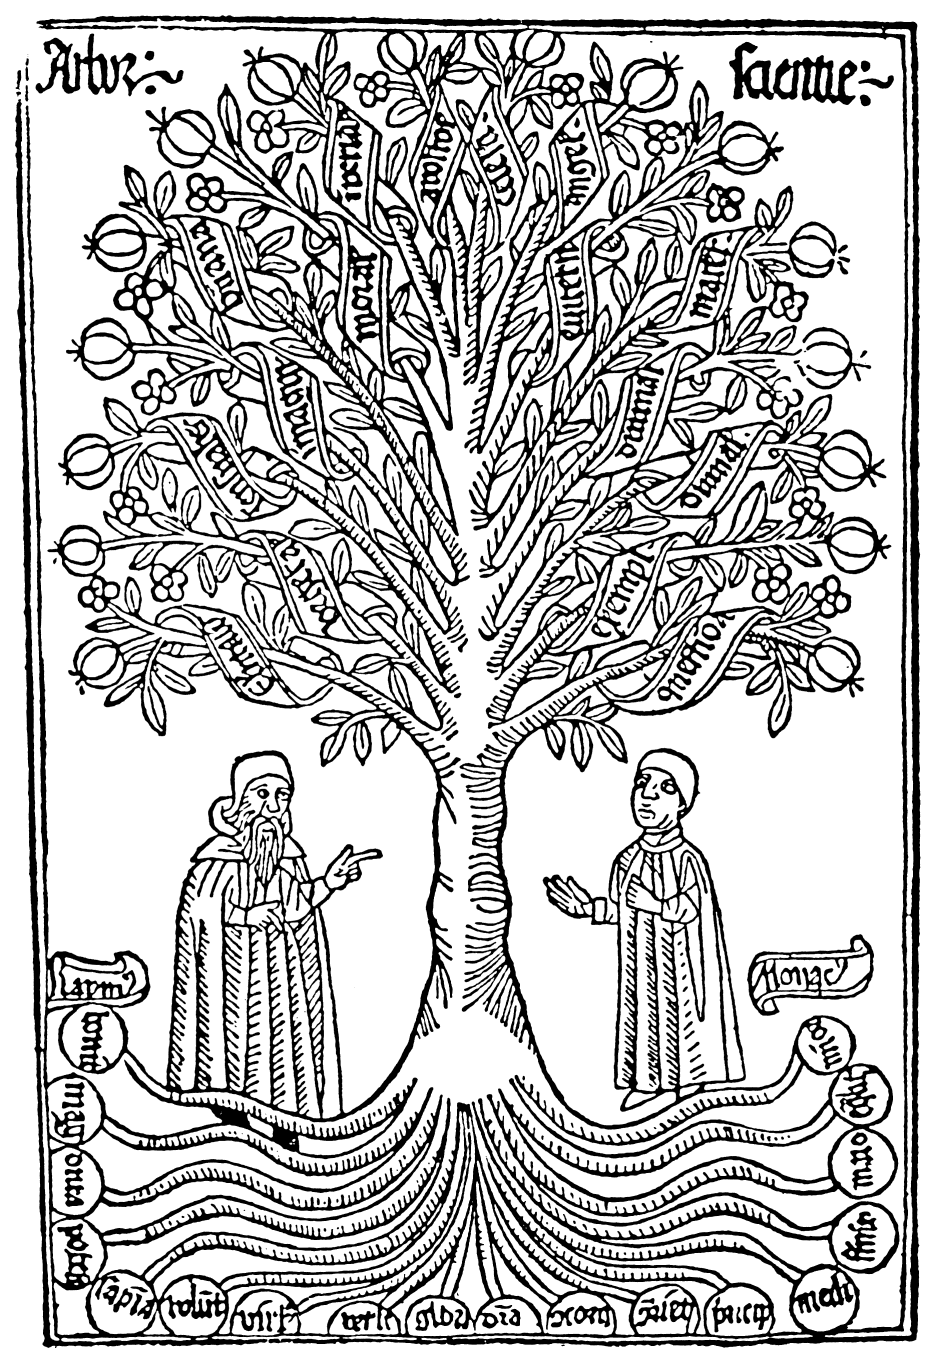 16th Century Woodcut, Llull's Tree of Knowledge